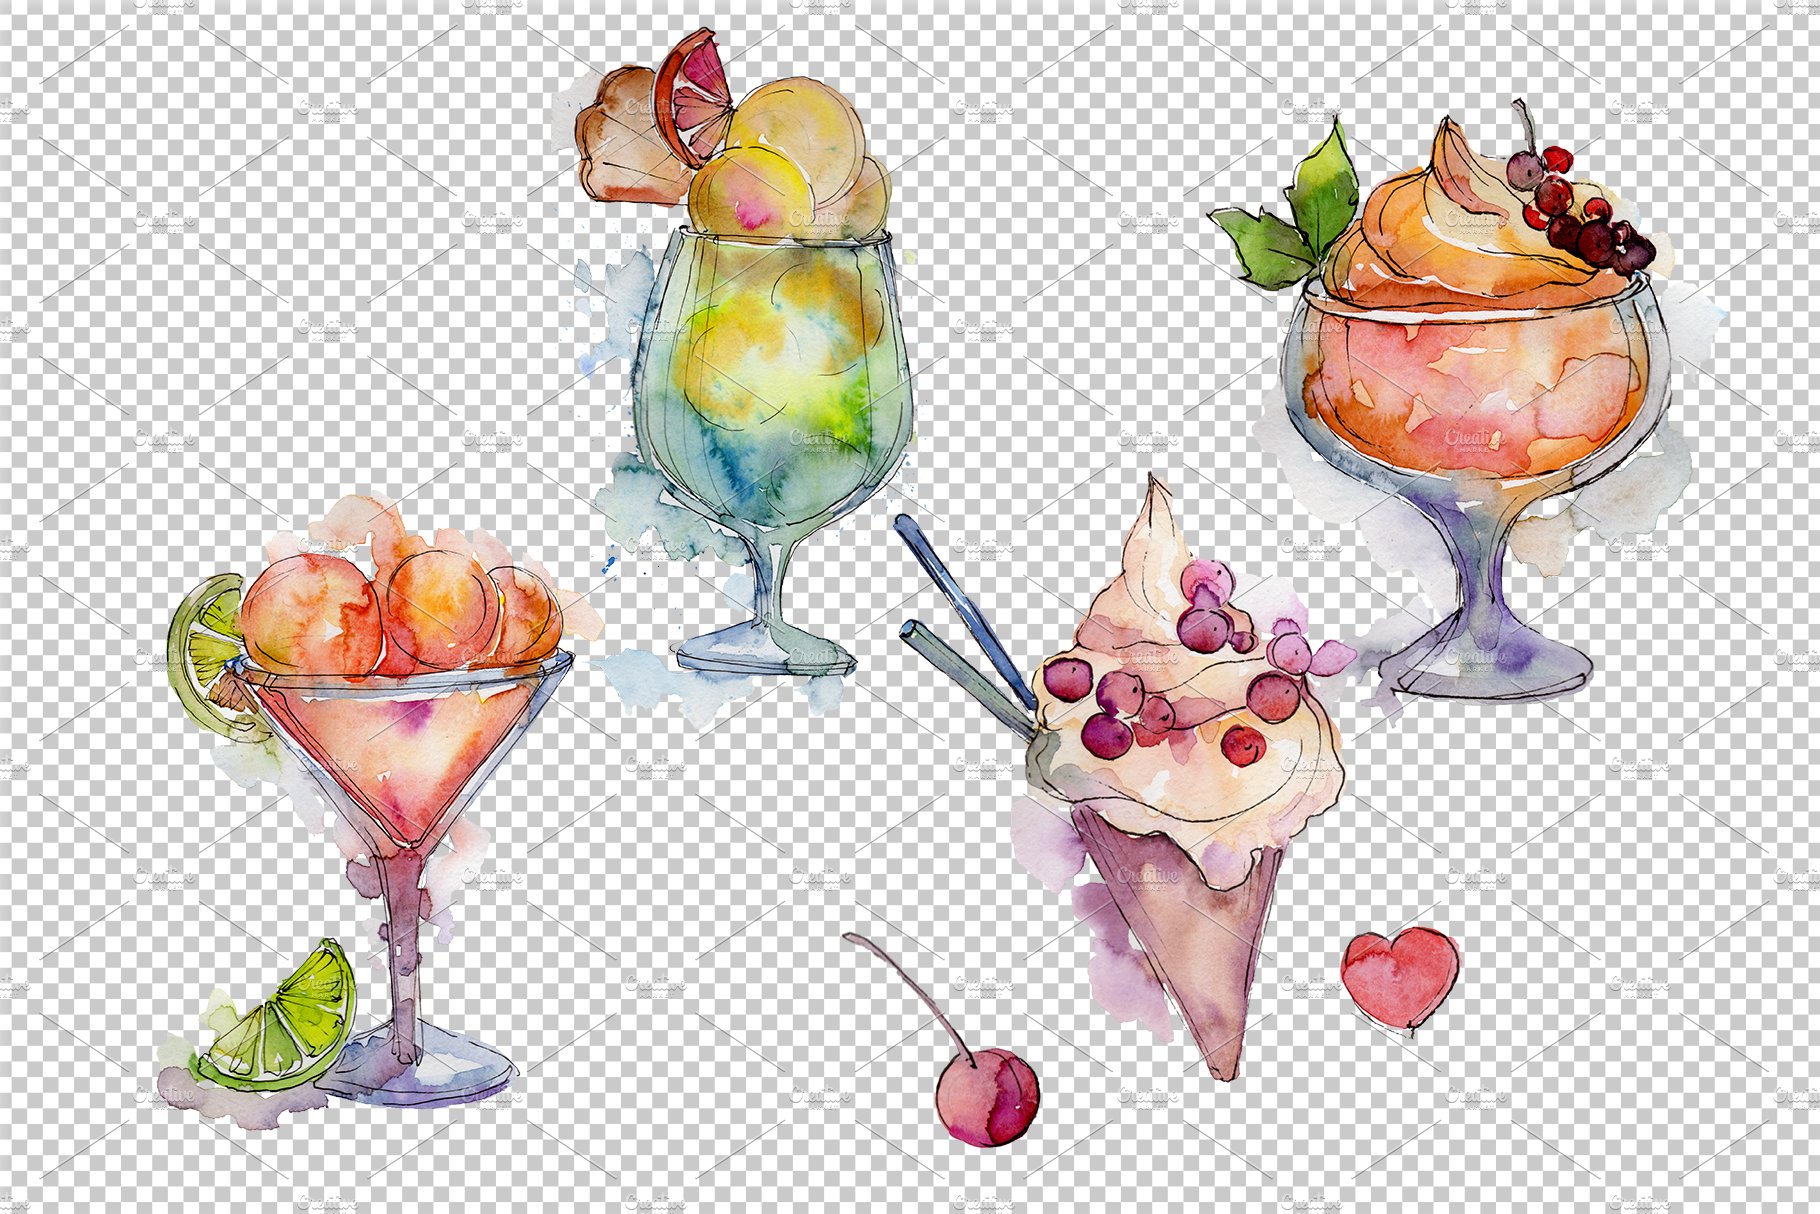 Some ice creams options in a watercolor style.